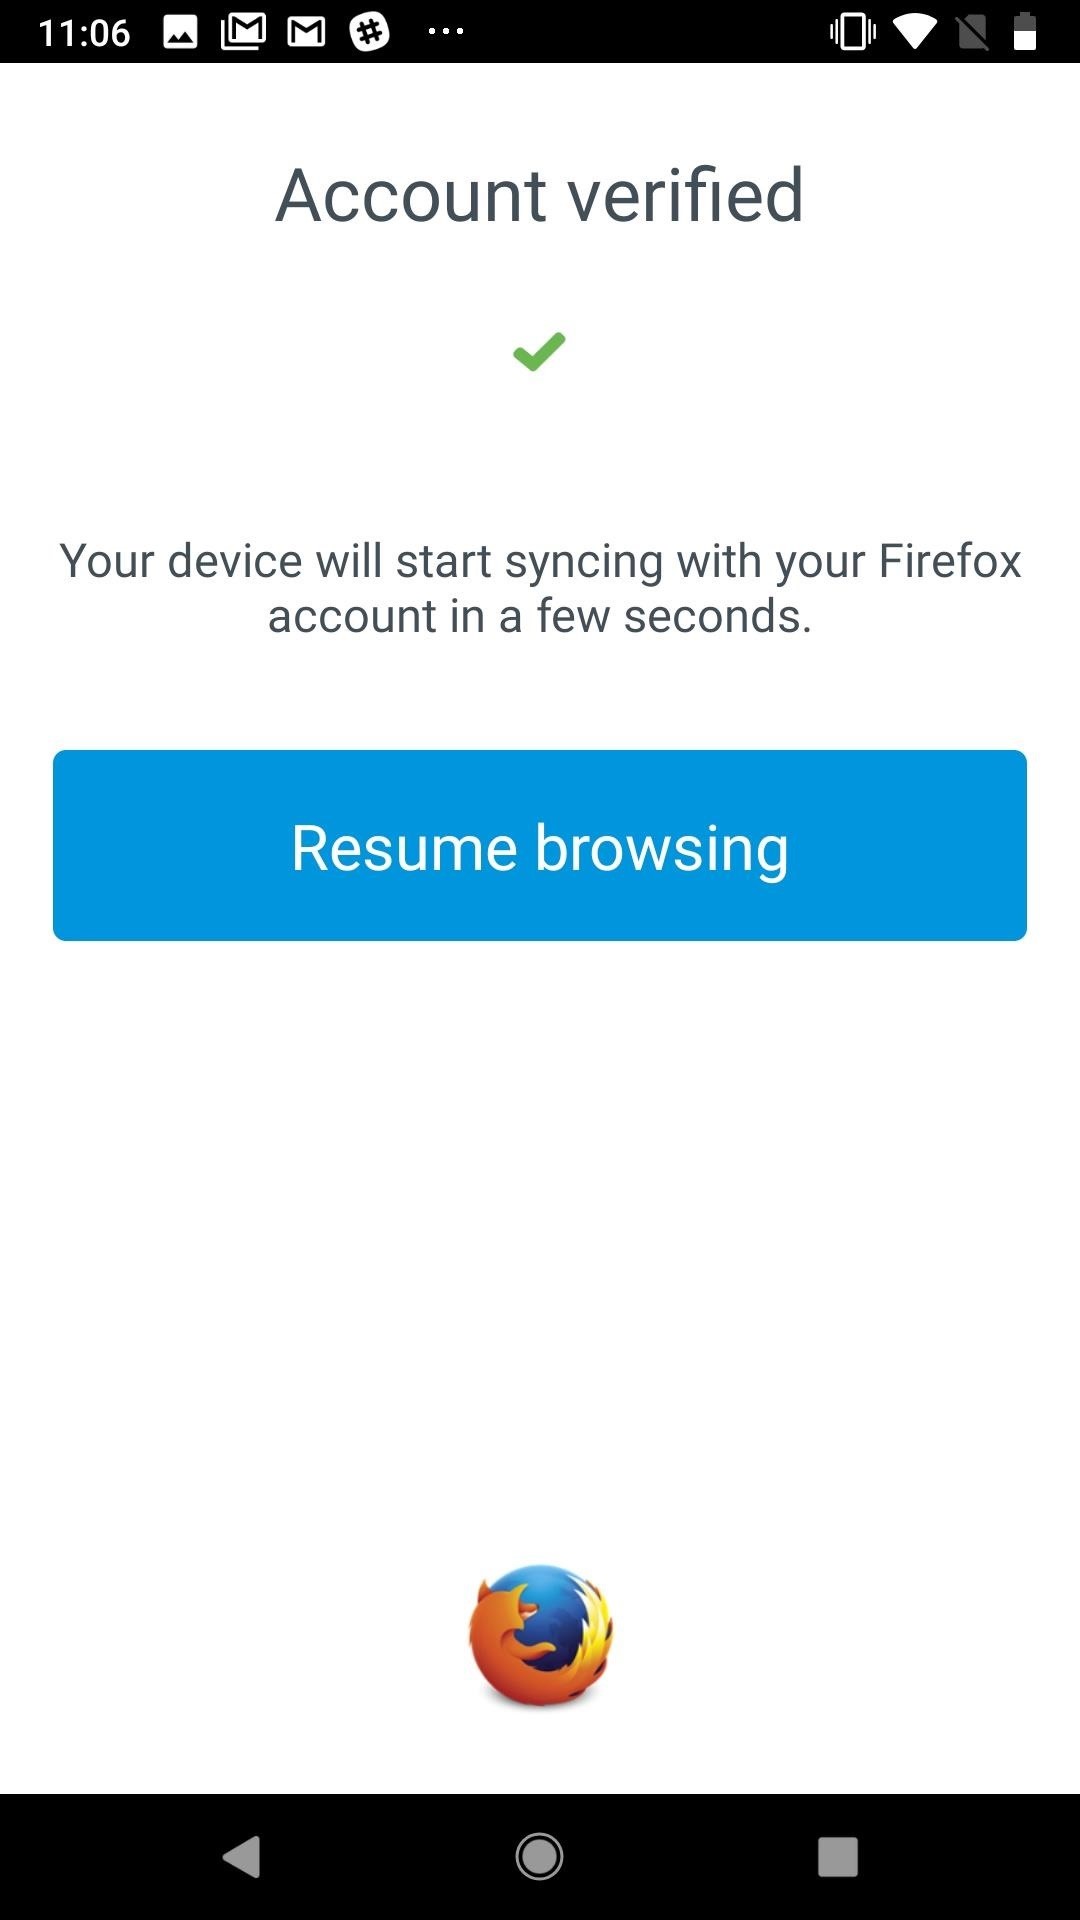 Samsung Internet 101: How to Sync Your Open Tabs with Desktop Firefox